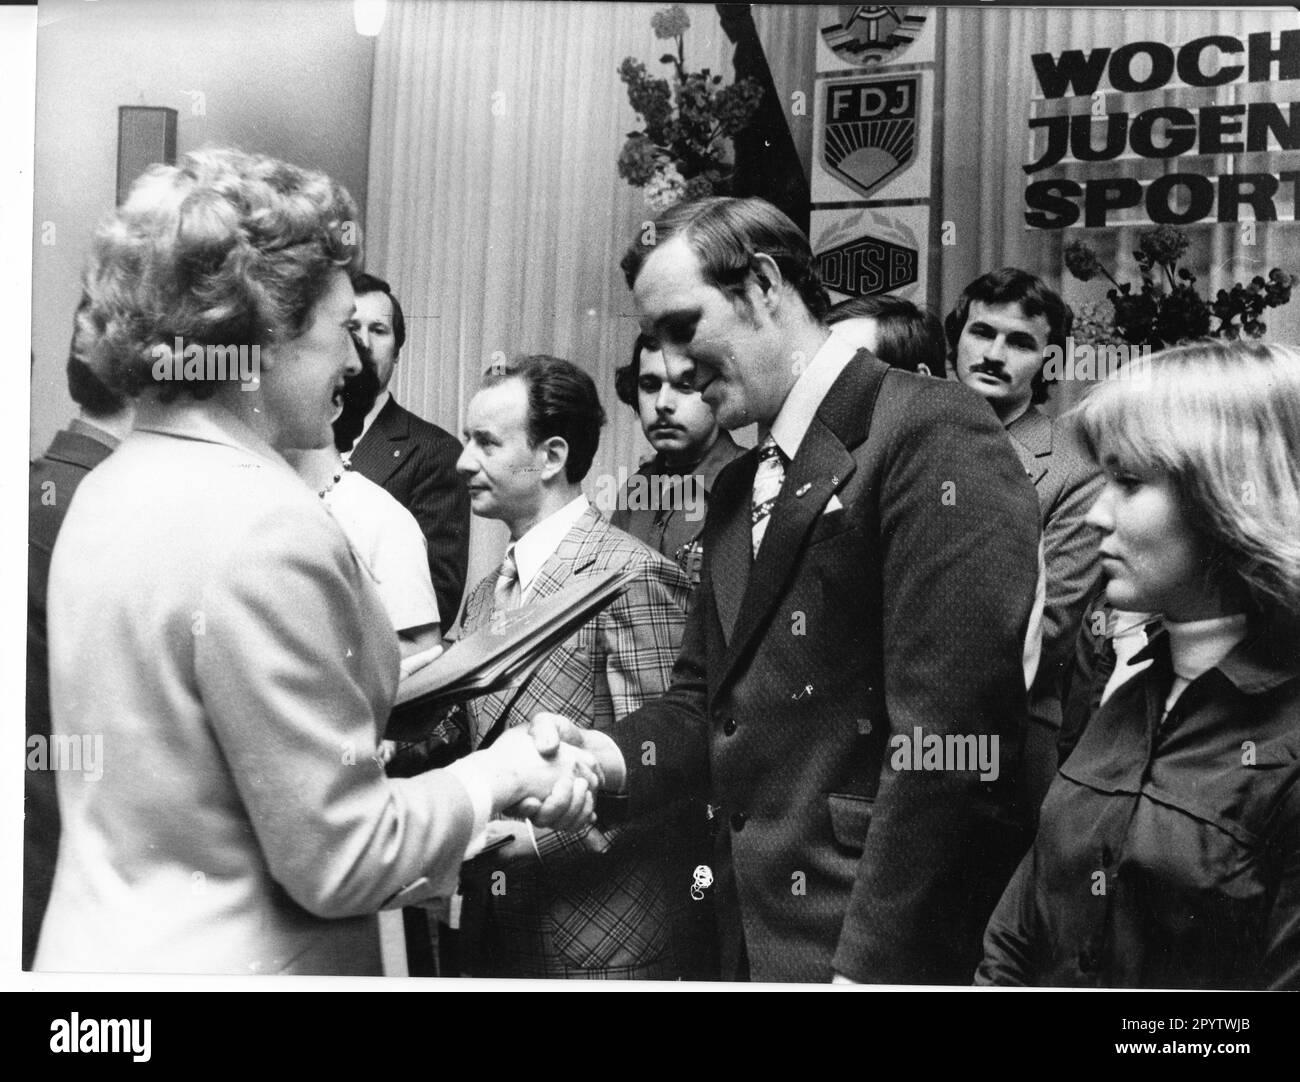 'Opening of the ''Week of Youth and Sportsmen'' in the Culture and Sports Hall in the city of Brandenburg. Central opening event of the GDR with about 2000 delegates. Opening by Paul Verner, member of the Politburo and Secretary of the Central Committee of the SED, Egon Krenz, 1st Secretary of the FDJ. Günther Jahn, 1st Secretary of the Potsdam district leadership of the SED. Awarding of sports officials on stage. Ceremonial event. Event. GDR. historical. Photo: MAZ/Bruno Wernitz,29.05.1976 [automated translation]' Stock Photo